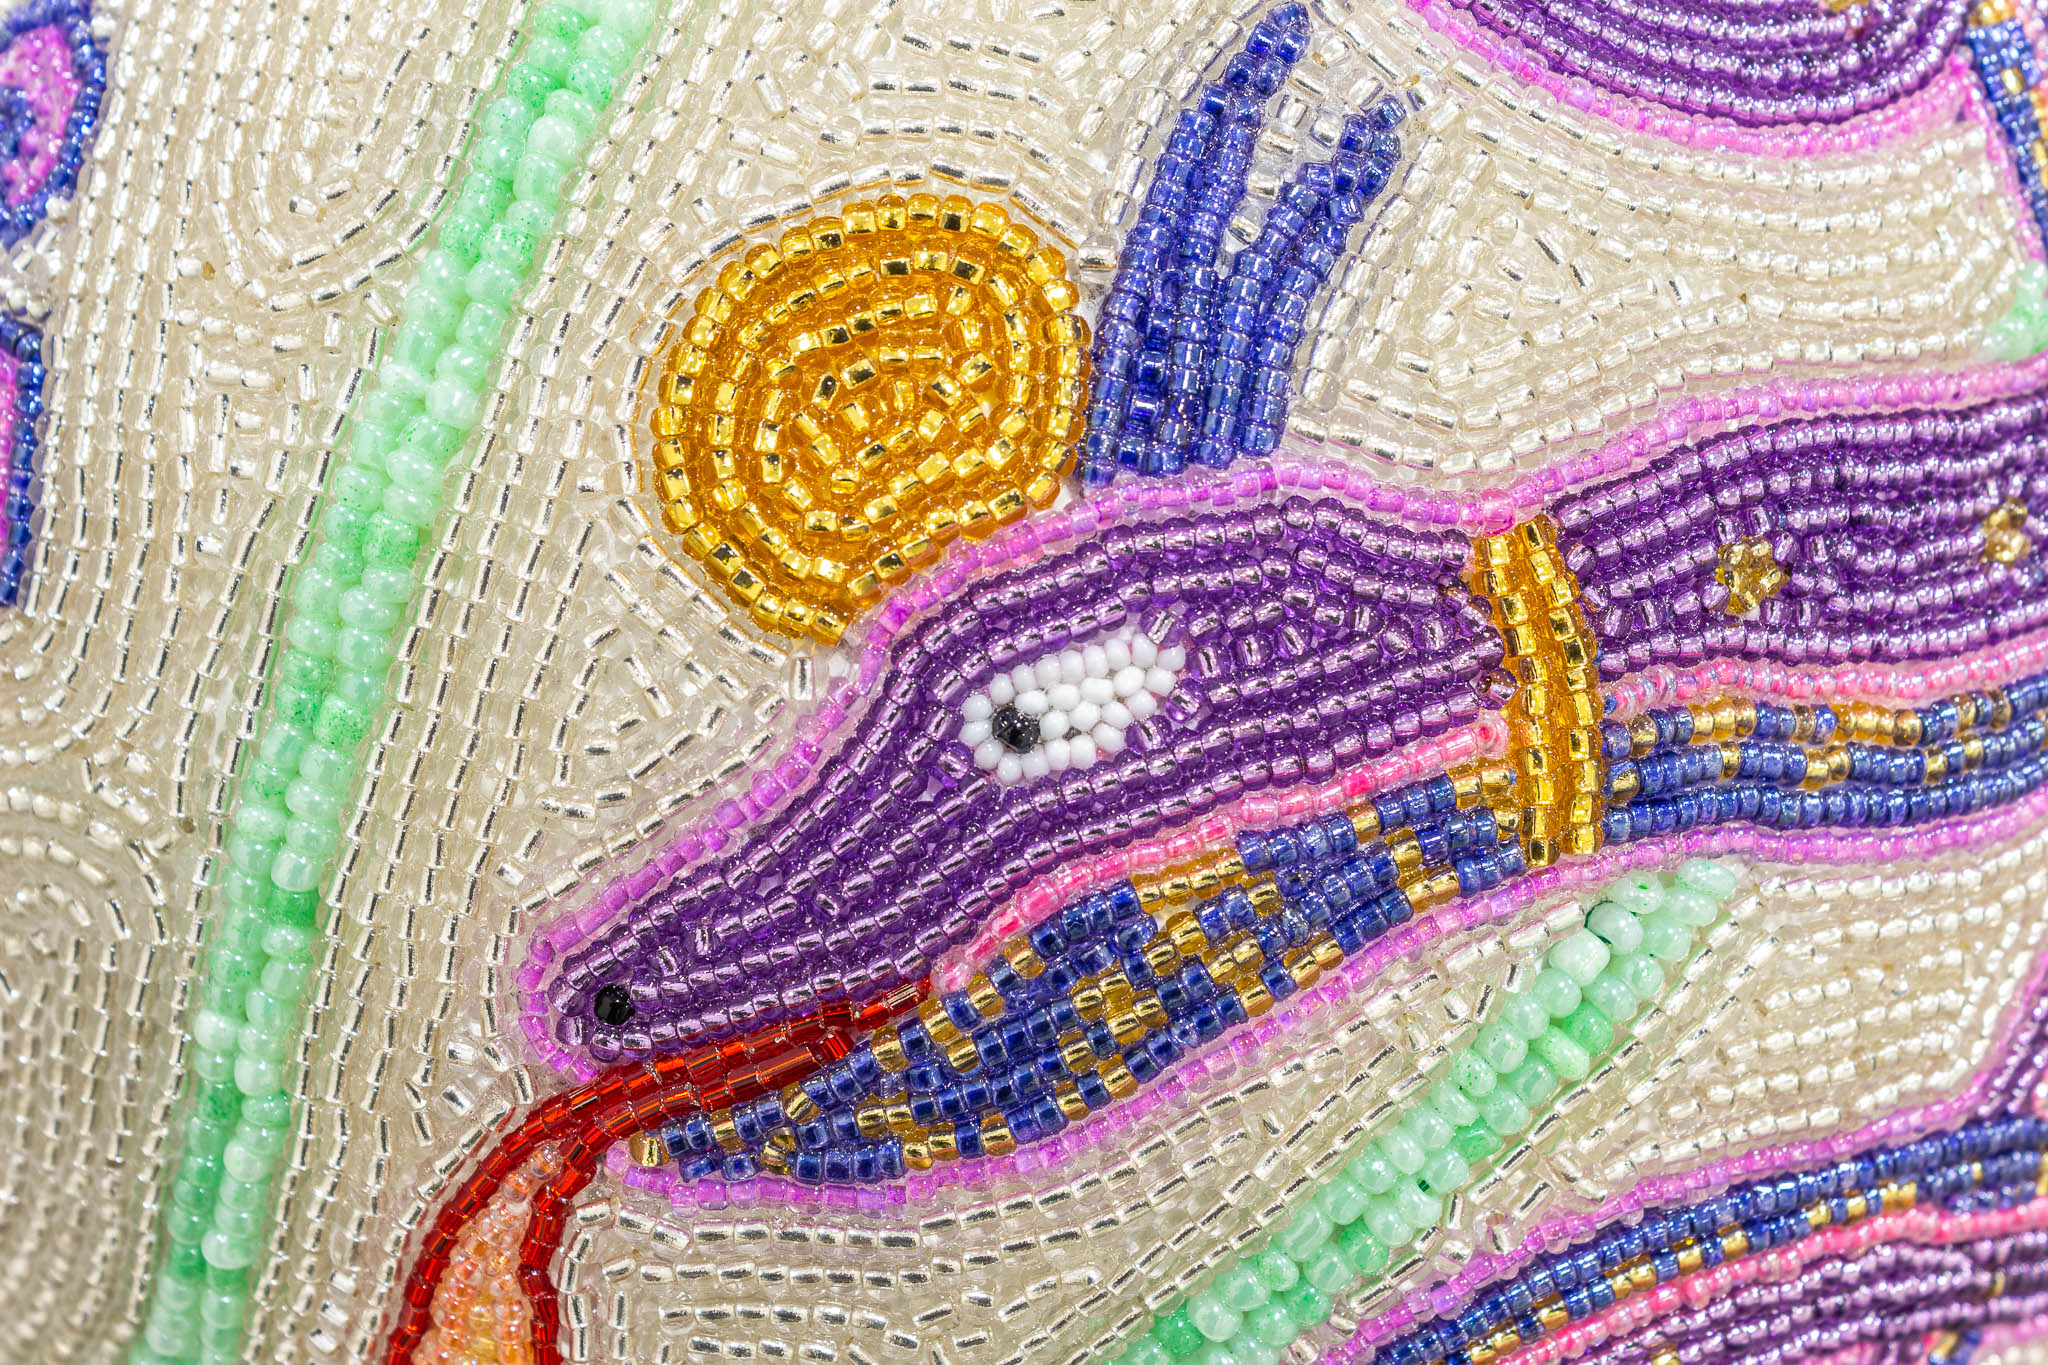 a detail of a purple beaded snake